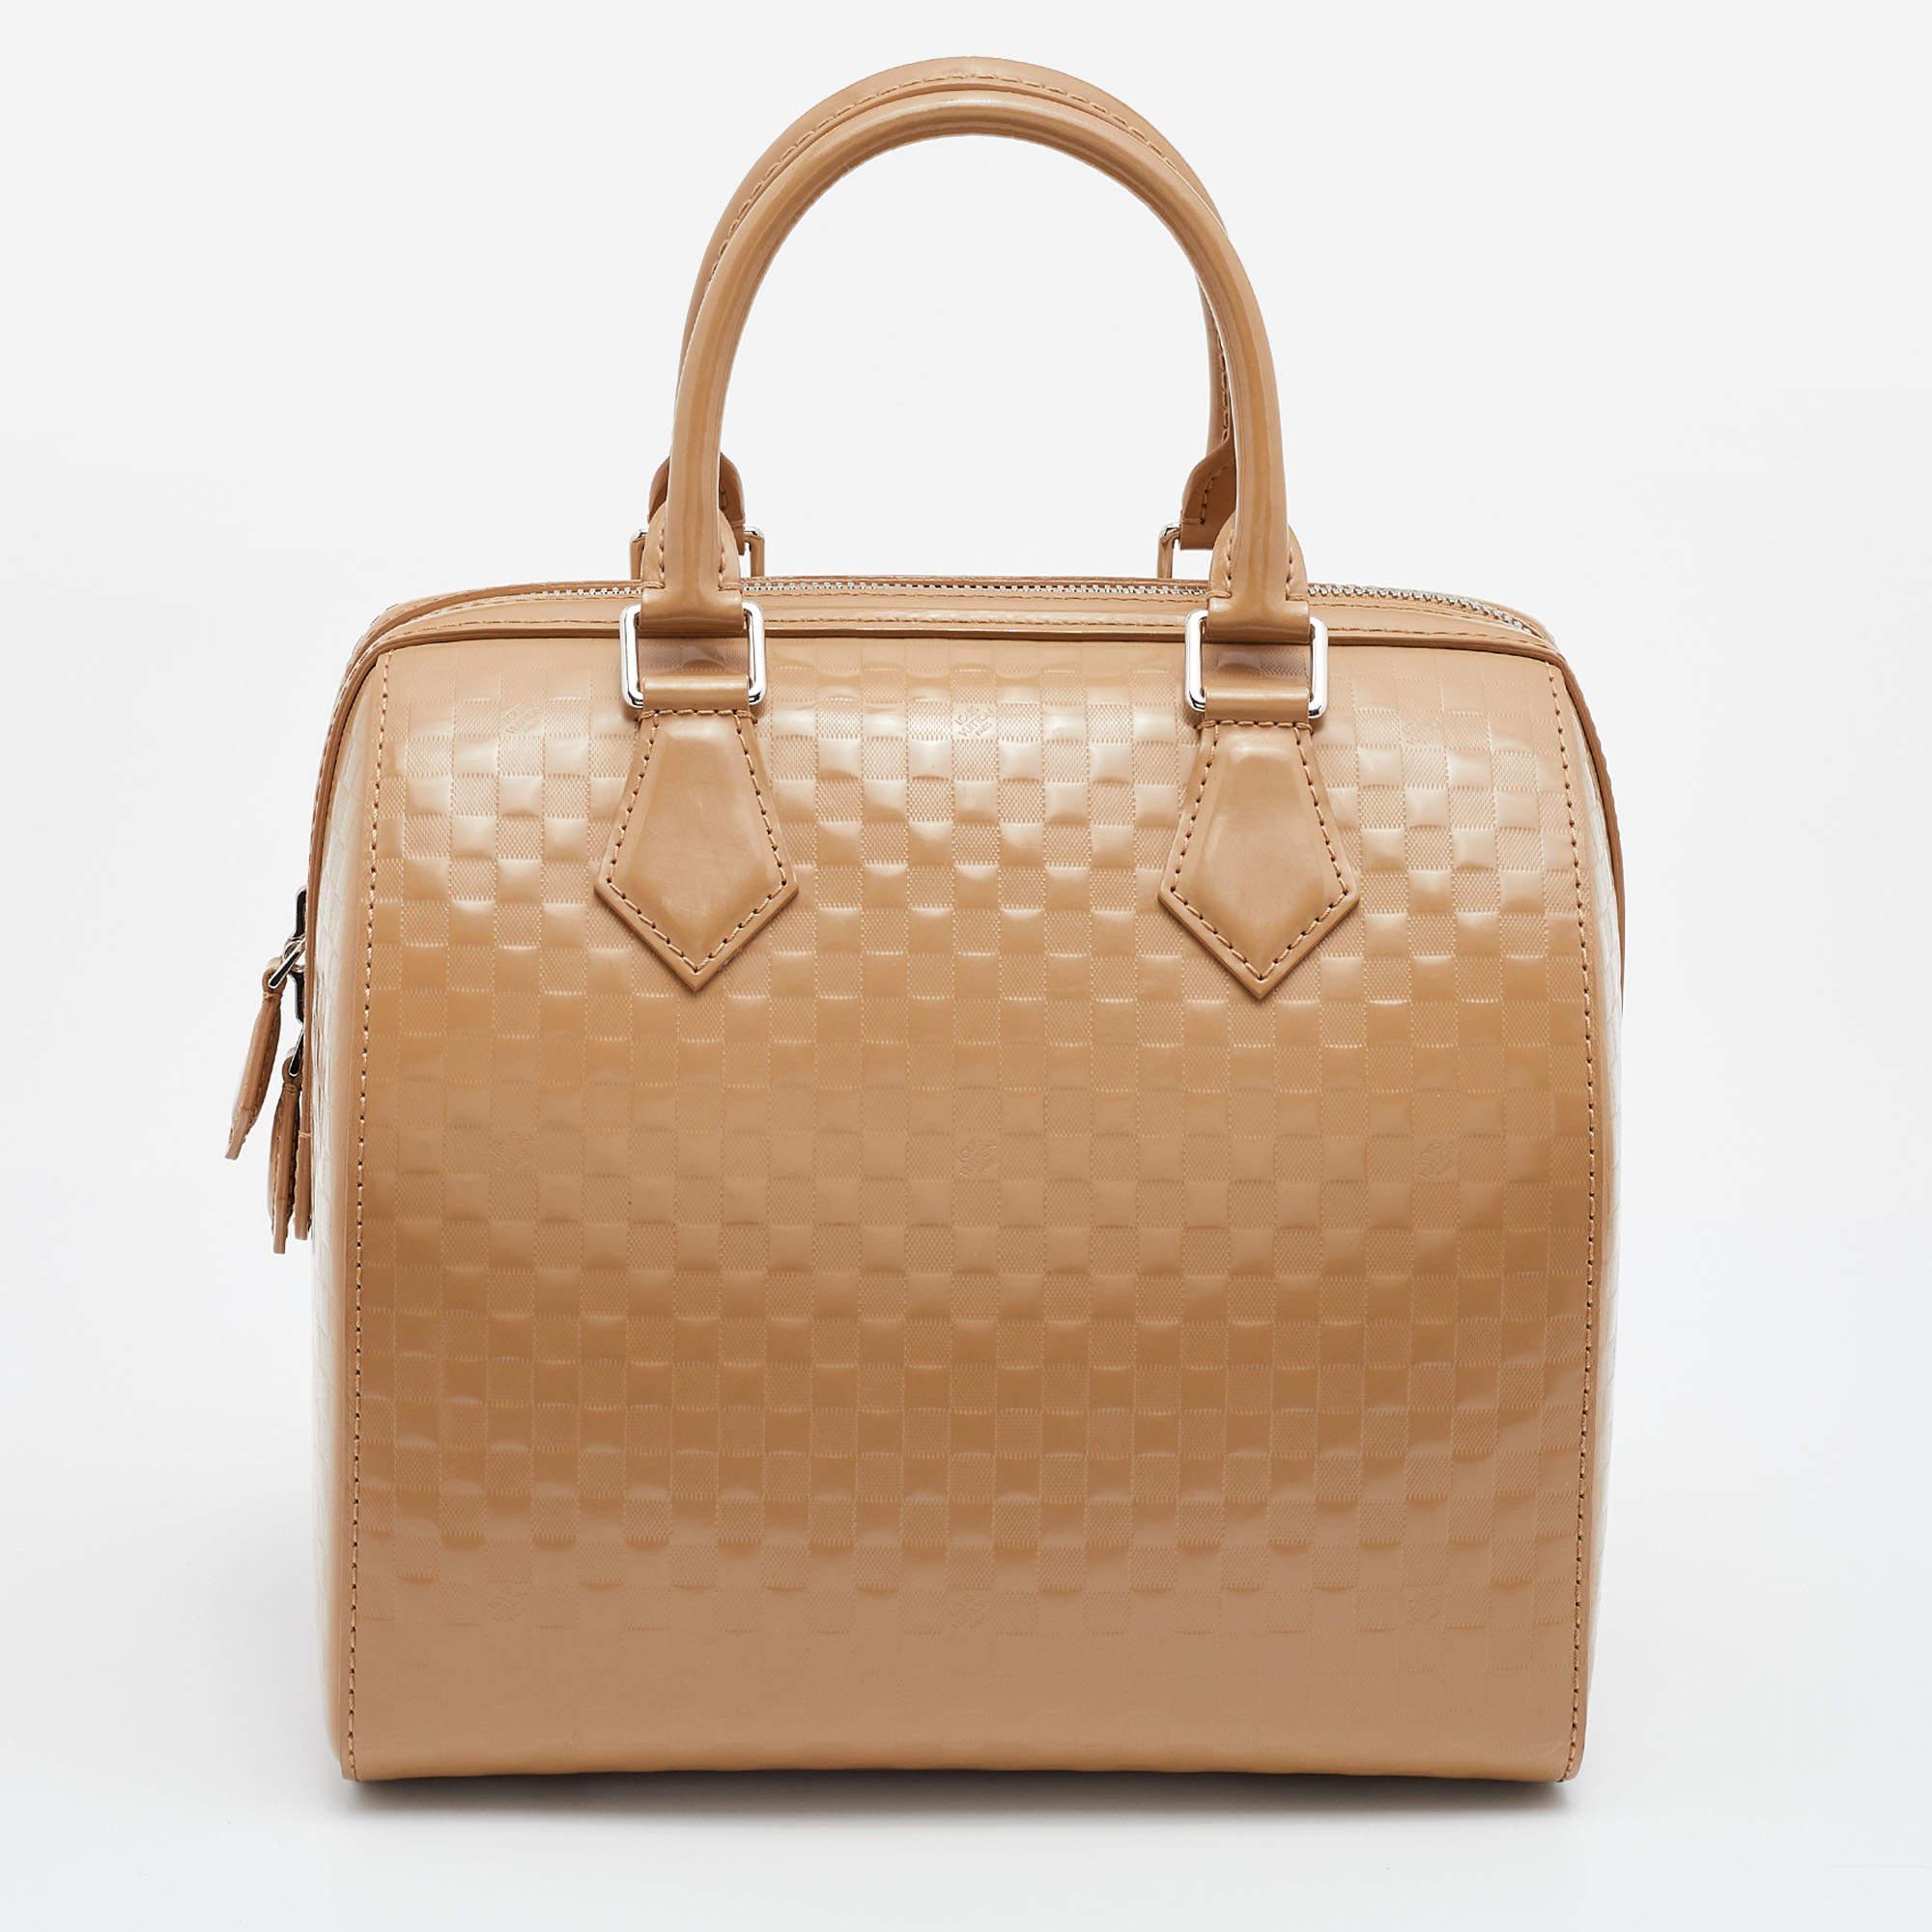 Don't miss the chance to own this gorgeous Louis Vuitton Speedy Cube MM bag. Crafted using Damier Facette Vernis, the bag comes in a camel tone paired with silver-tone metal. It's classy, timeless, and authentic!

Includes: Original Dustbag

